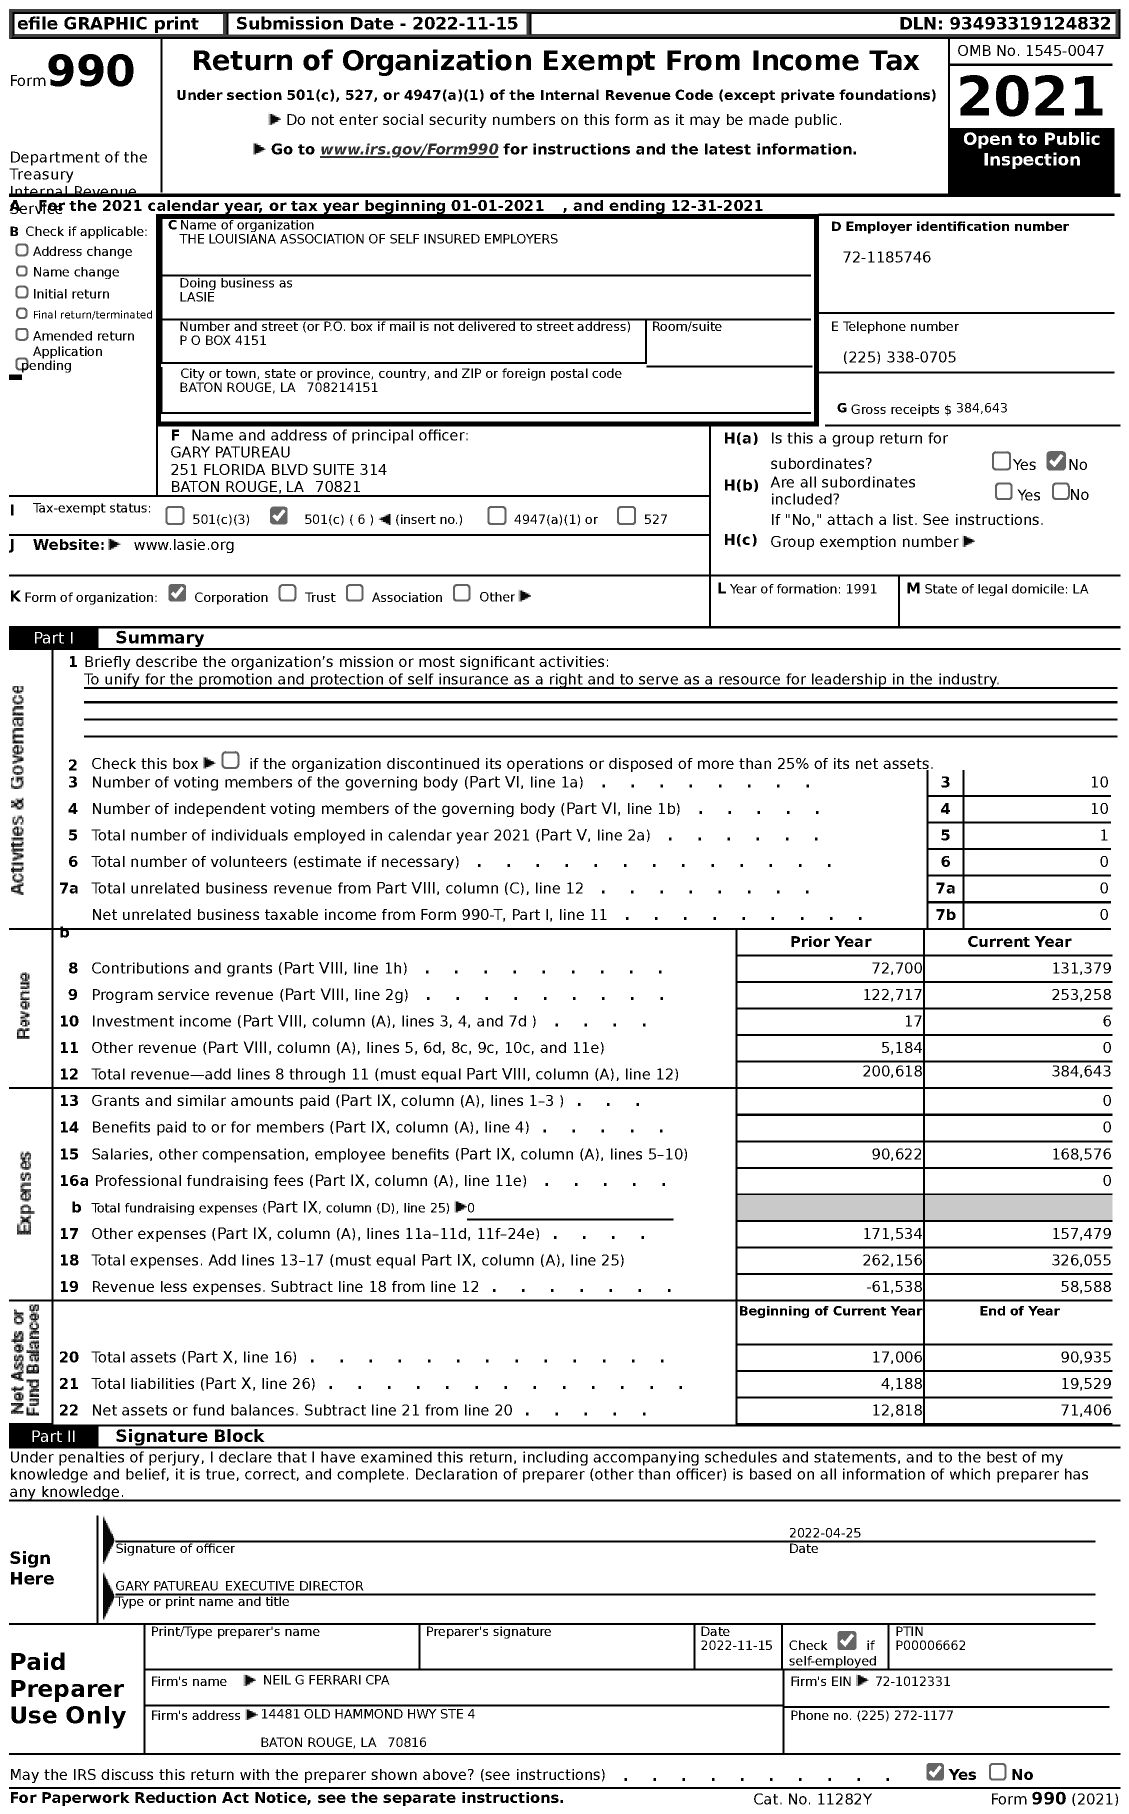 Image of first page of 2021 Form 990 for The Louisiana Association of Self Insured Employers (LASIE)